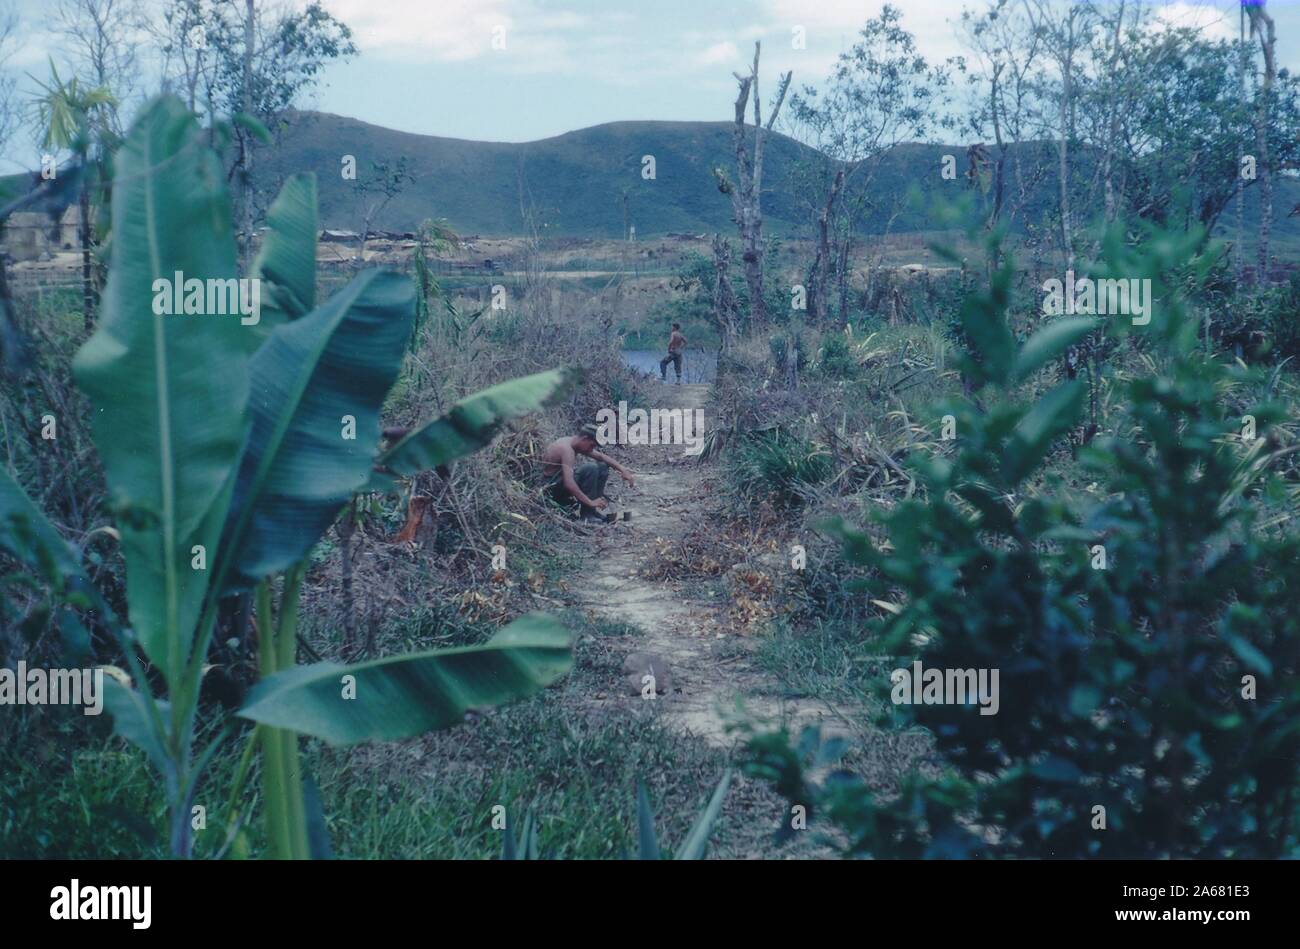 Long-shot of a dirt path leading to a body of water in a rural area, with one soldier sitting mid-path and another standing near the water's edge, Vietnam, 1965. () Stock Photo